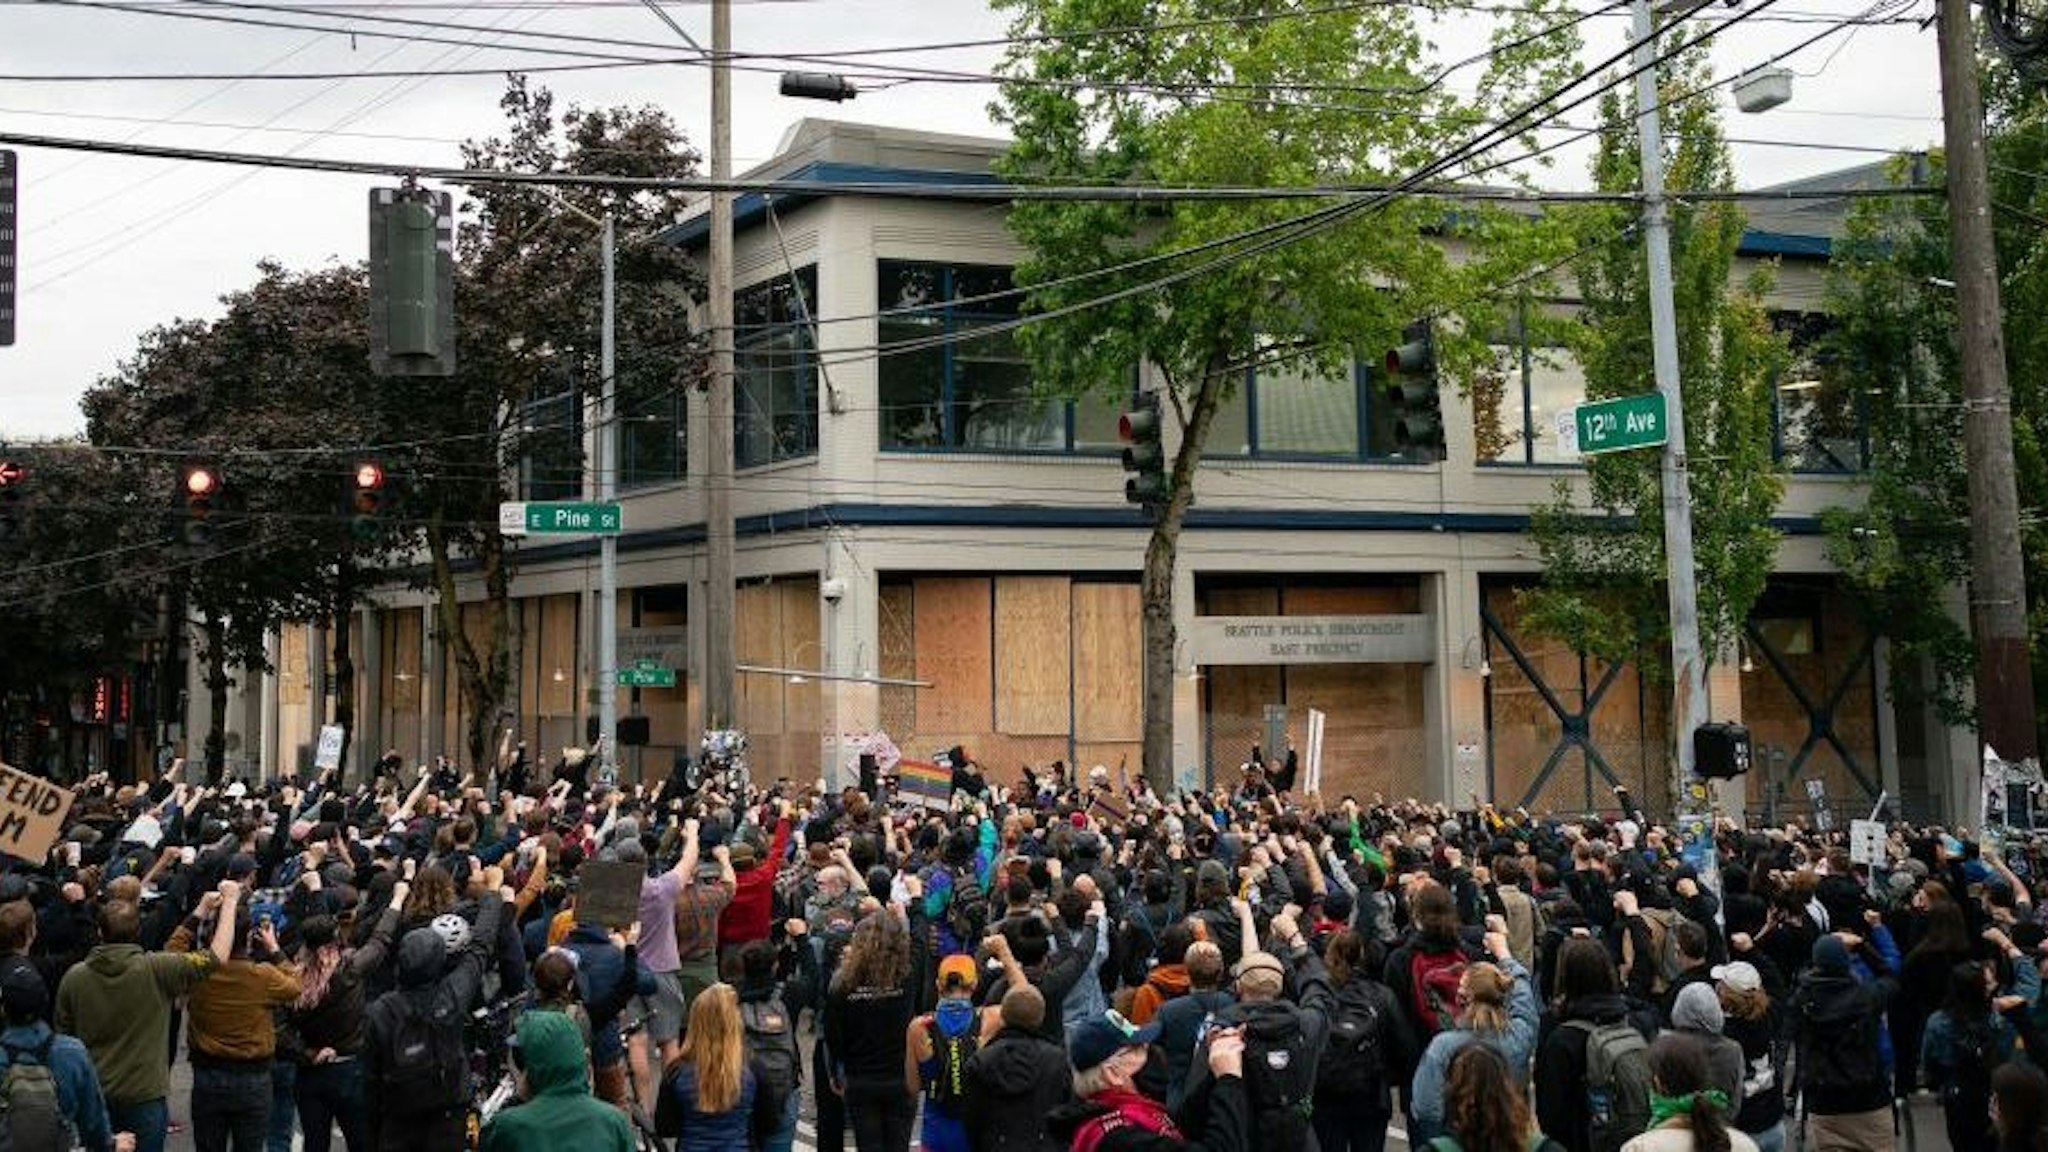 Demonstrators hold a rally and teach-in outside of the Seattle Police Department's East Precinct, which has been boarded up and protected by fencing, on June 8, 2020 in Seattle, Washington. Seattle Police and Washington National Guard personnel vacated the area after the previous night saw violent clashes in the vicinity during ongoing Black Lives Matter protests in the wake of George Floyds death. (Photo by David Ryder/Getty Images)